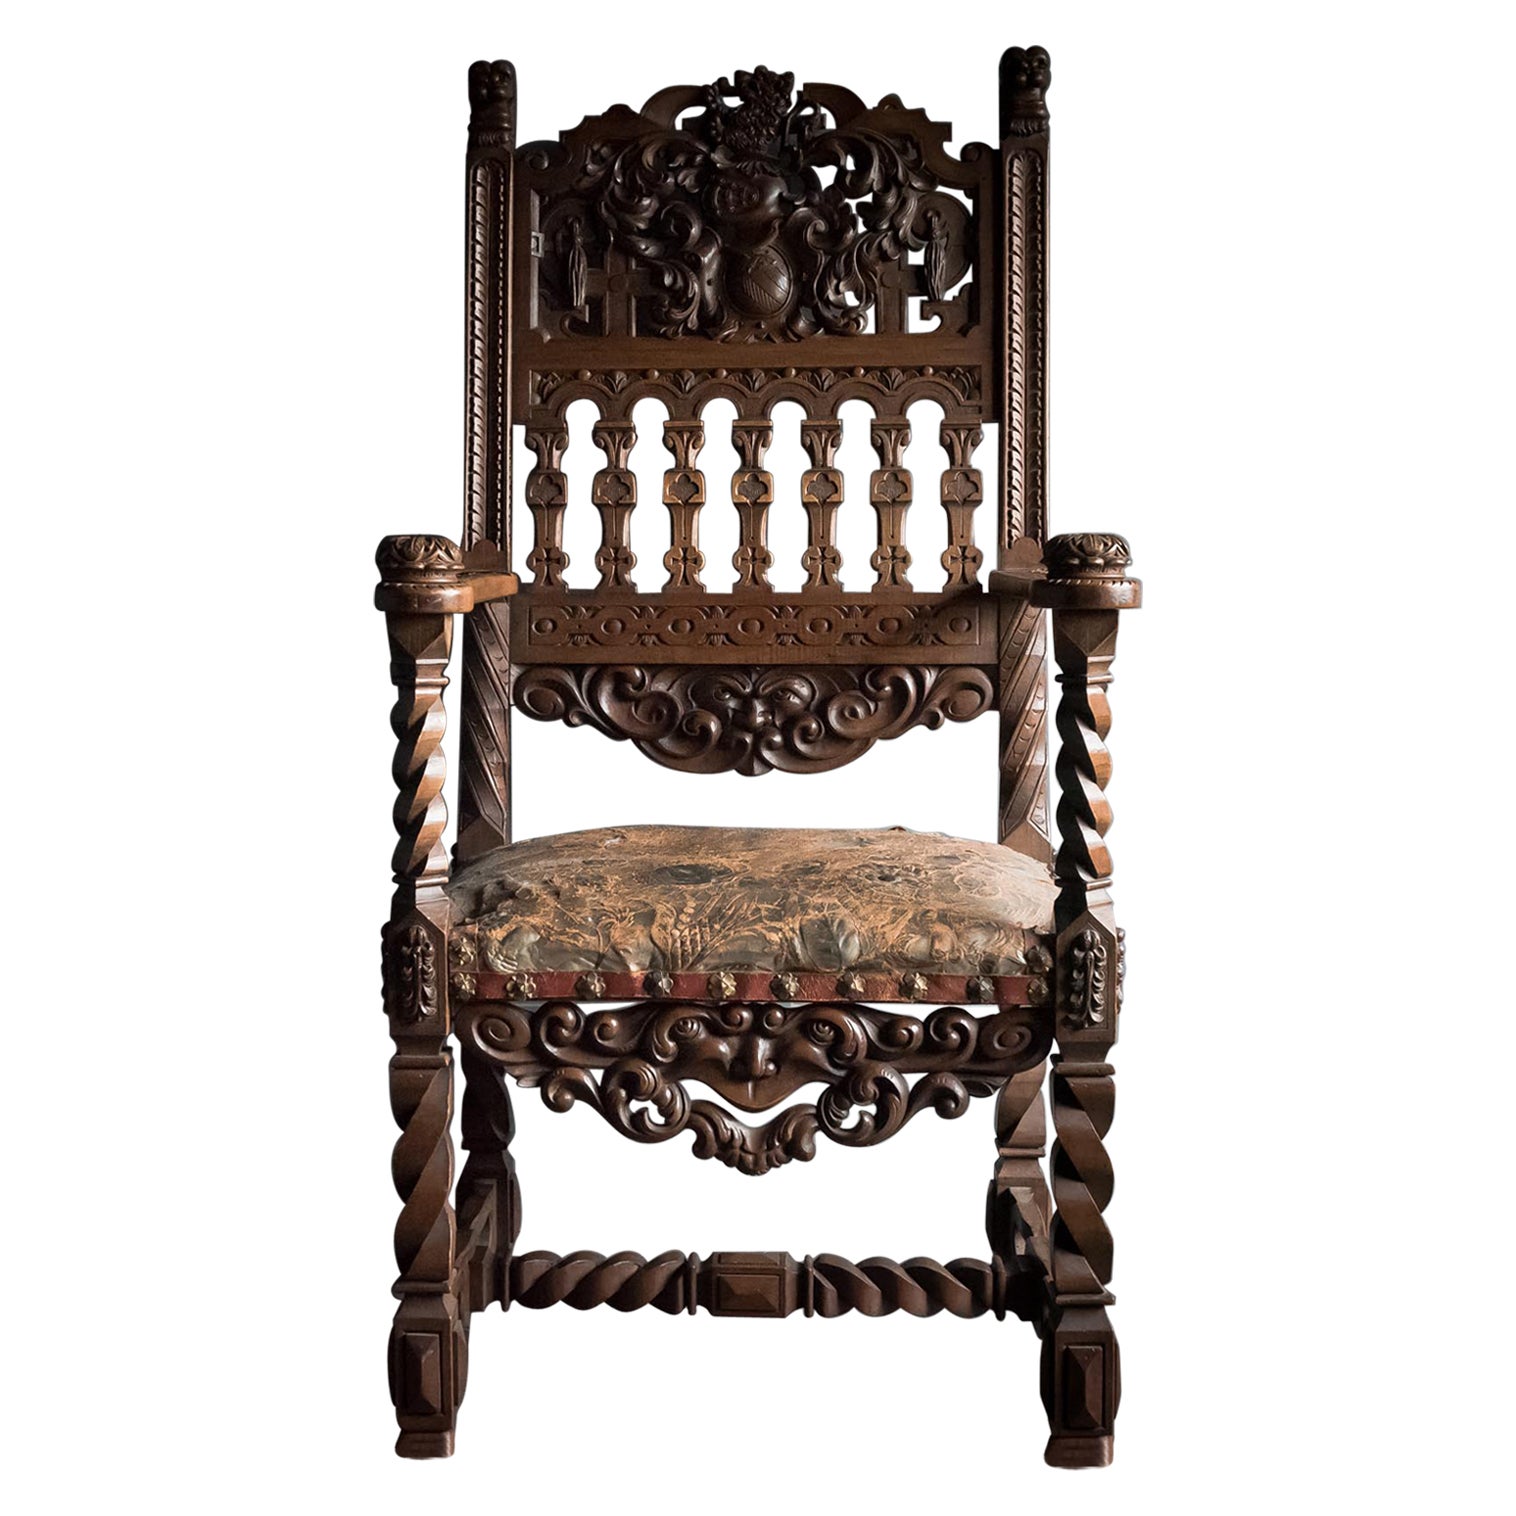 Heavily Carved Ornate Chair For Sale